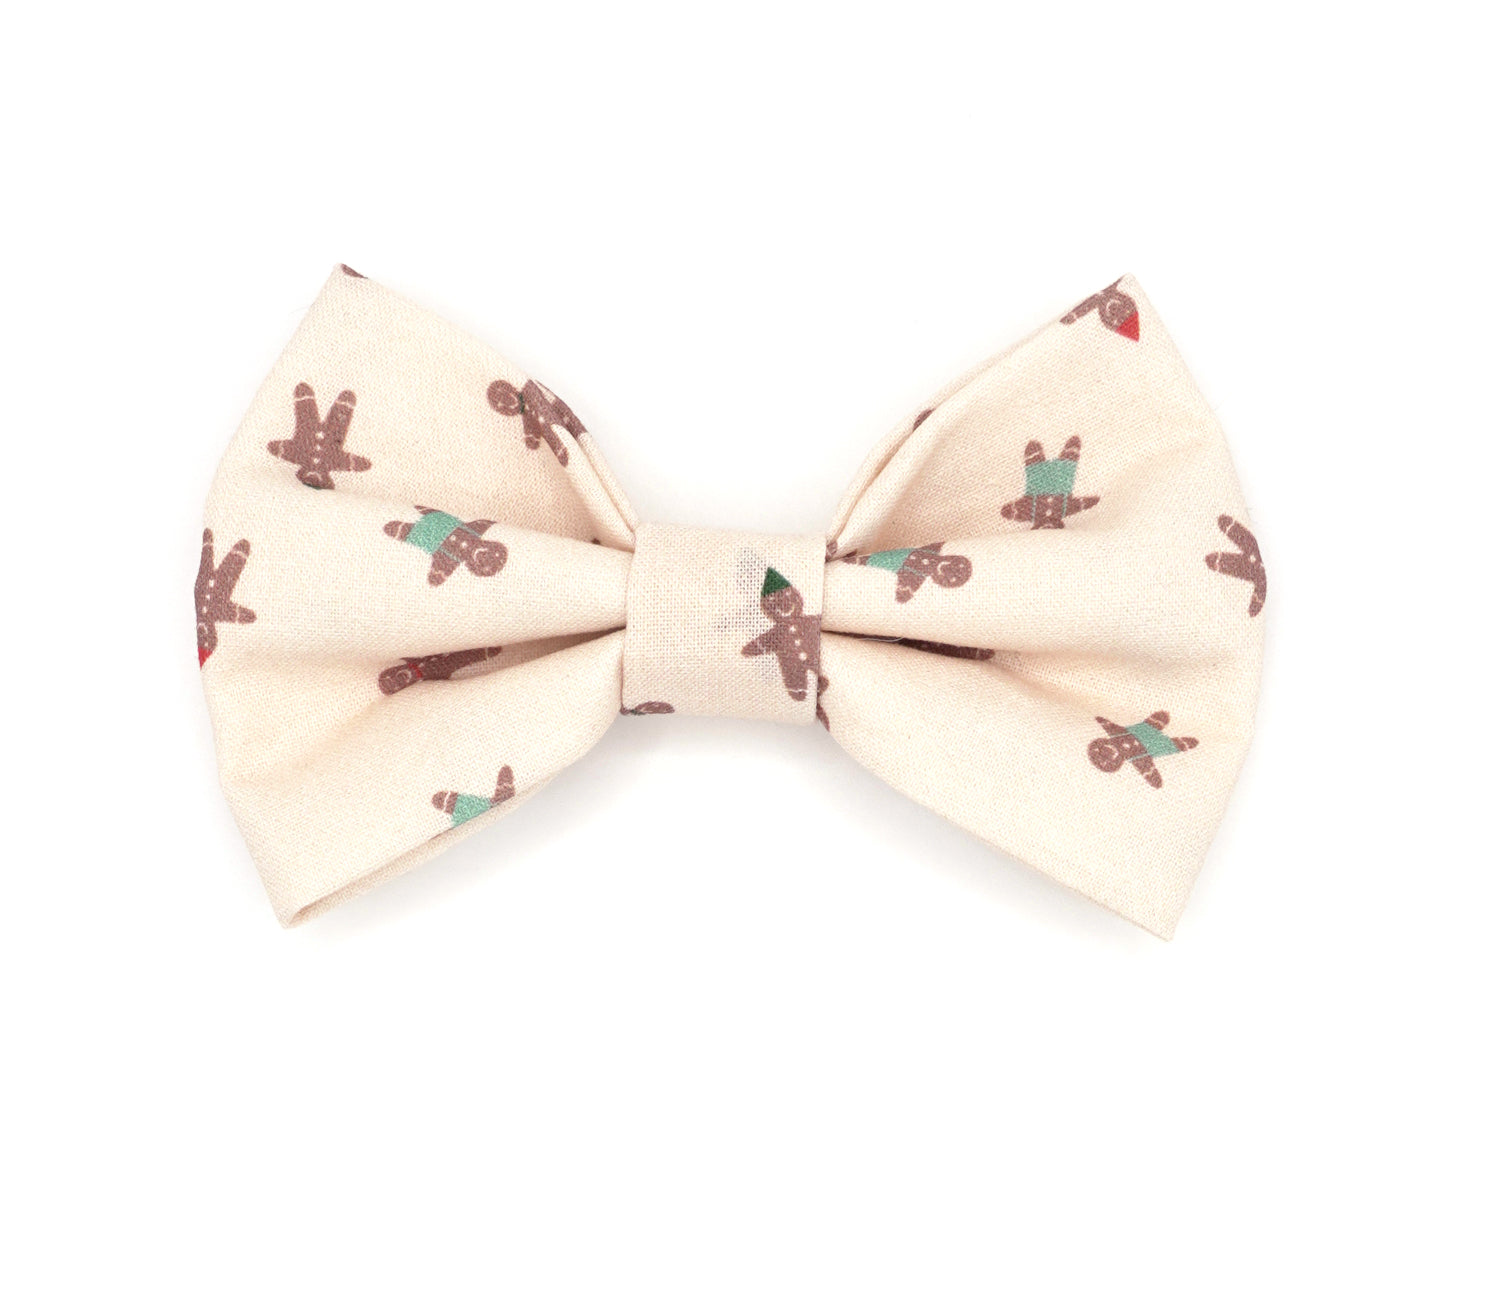 Handmade cotton bow tie for dogs (or other pets). Elastic straps on back with snaps make it easy to add to collar, harness, or leash. Very light beige background with brown gingerbread people, some wearing red or black party hats, some with teal pants.